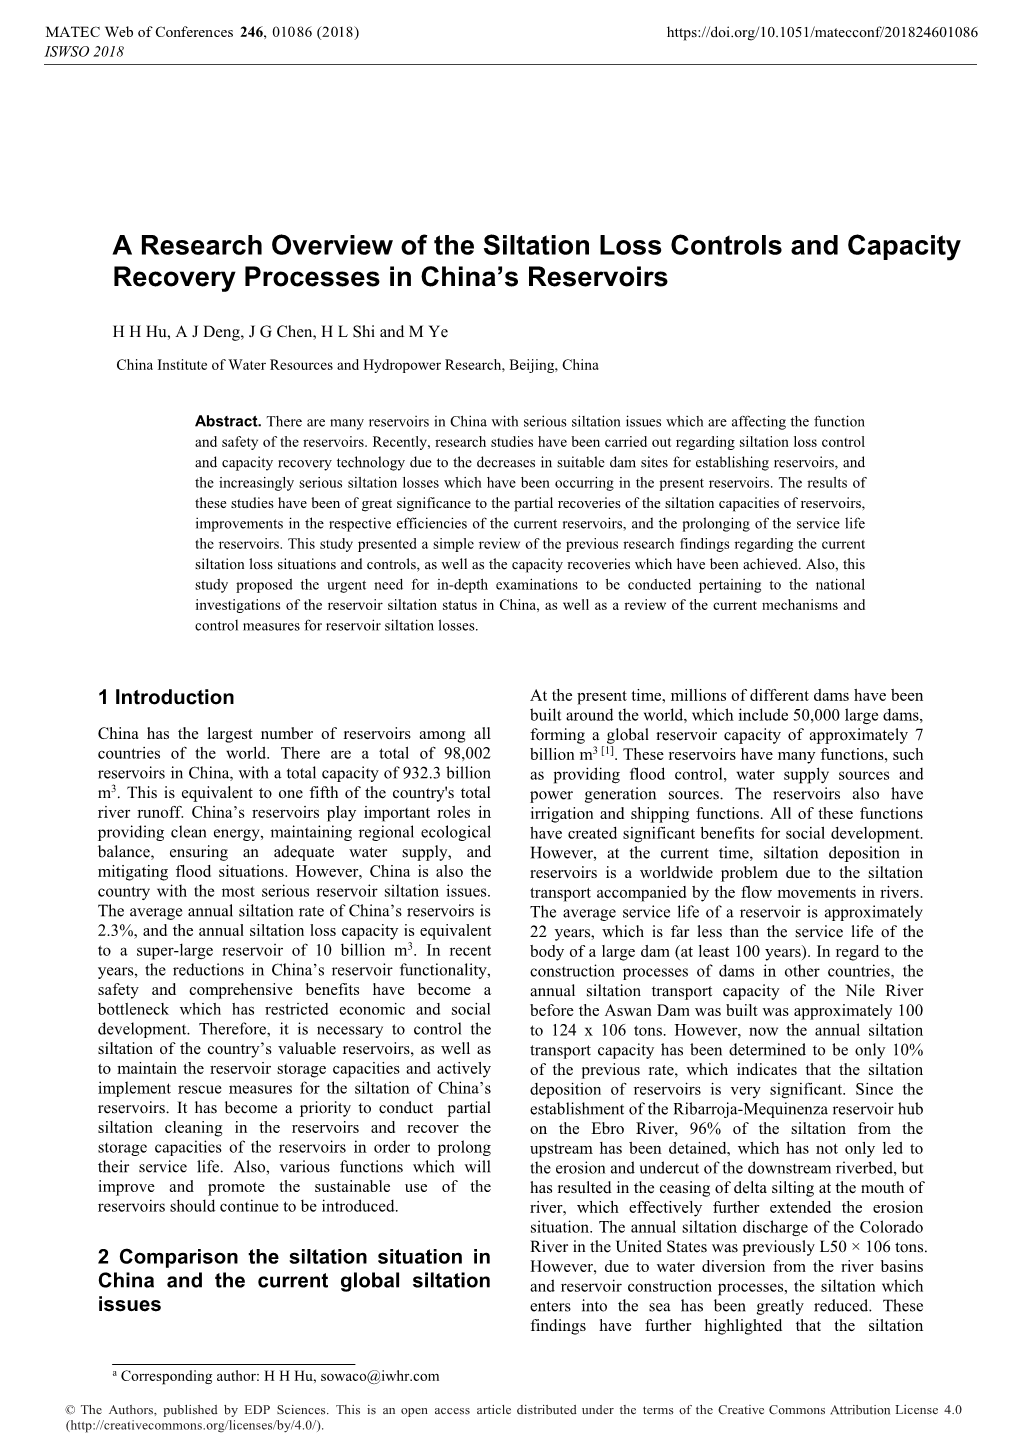 A Research Overview of the Siltation Loss Controls and Capacity Recovery Processes in China’S Reservoirs